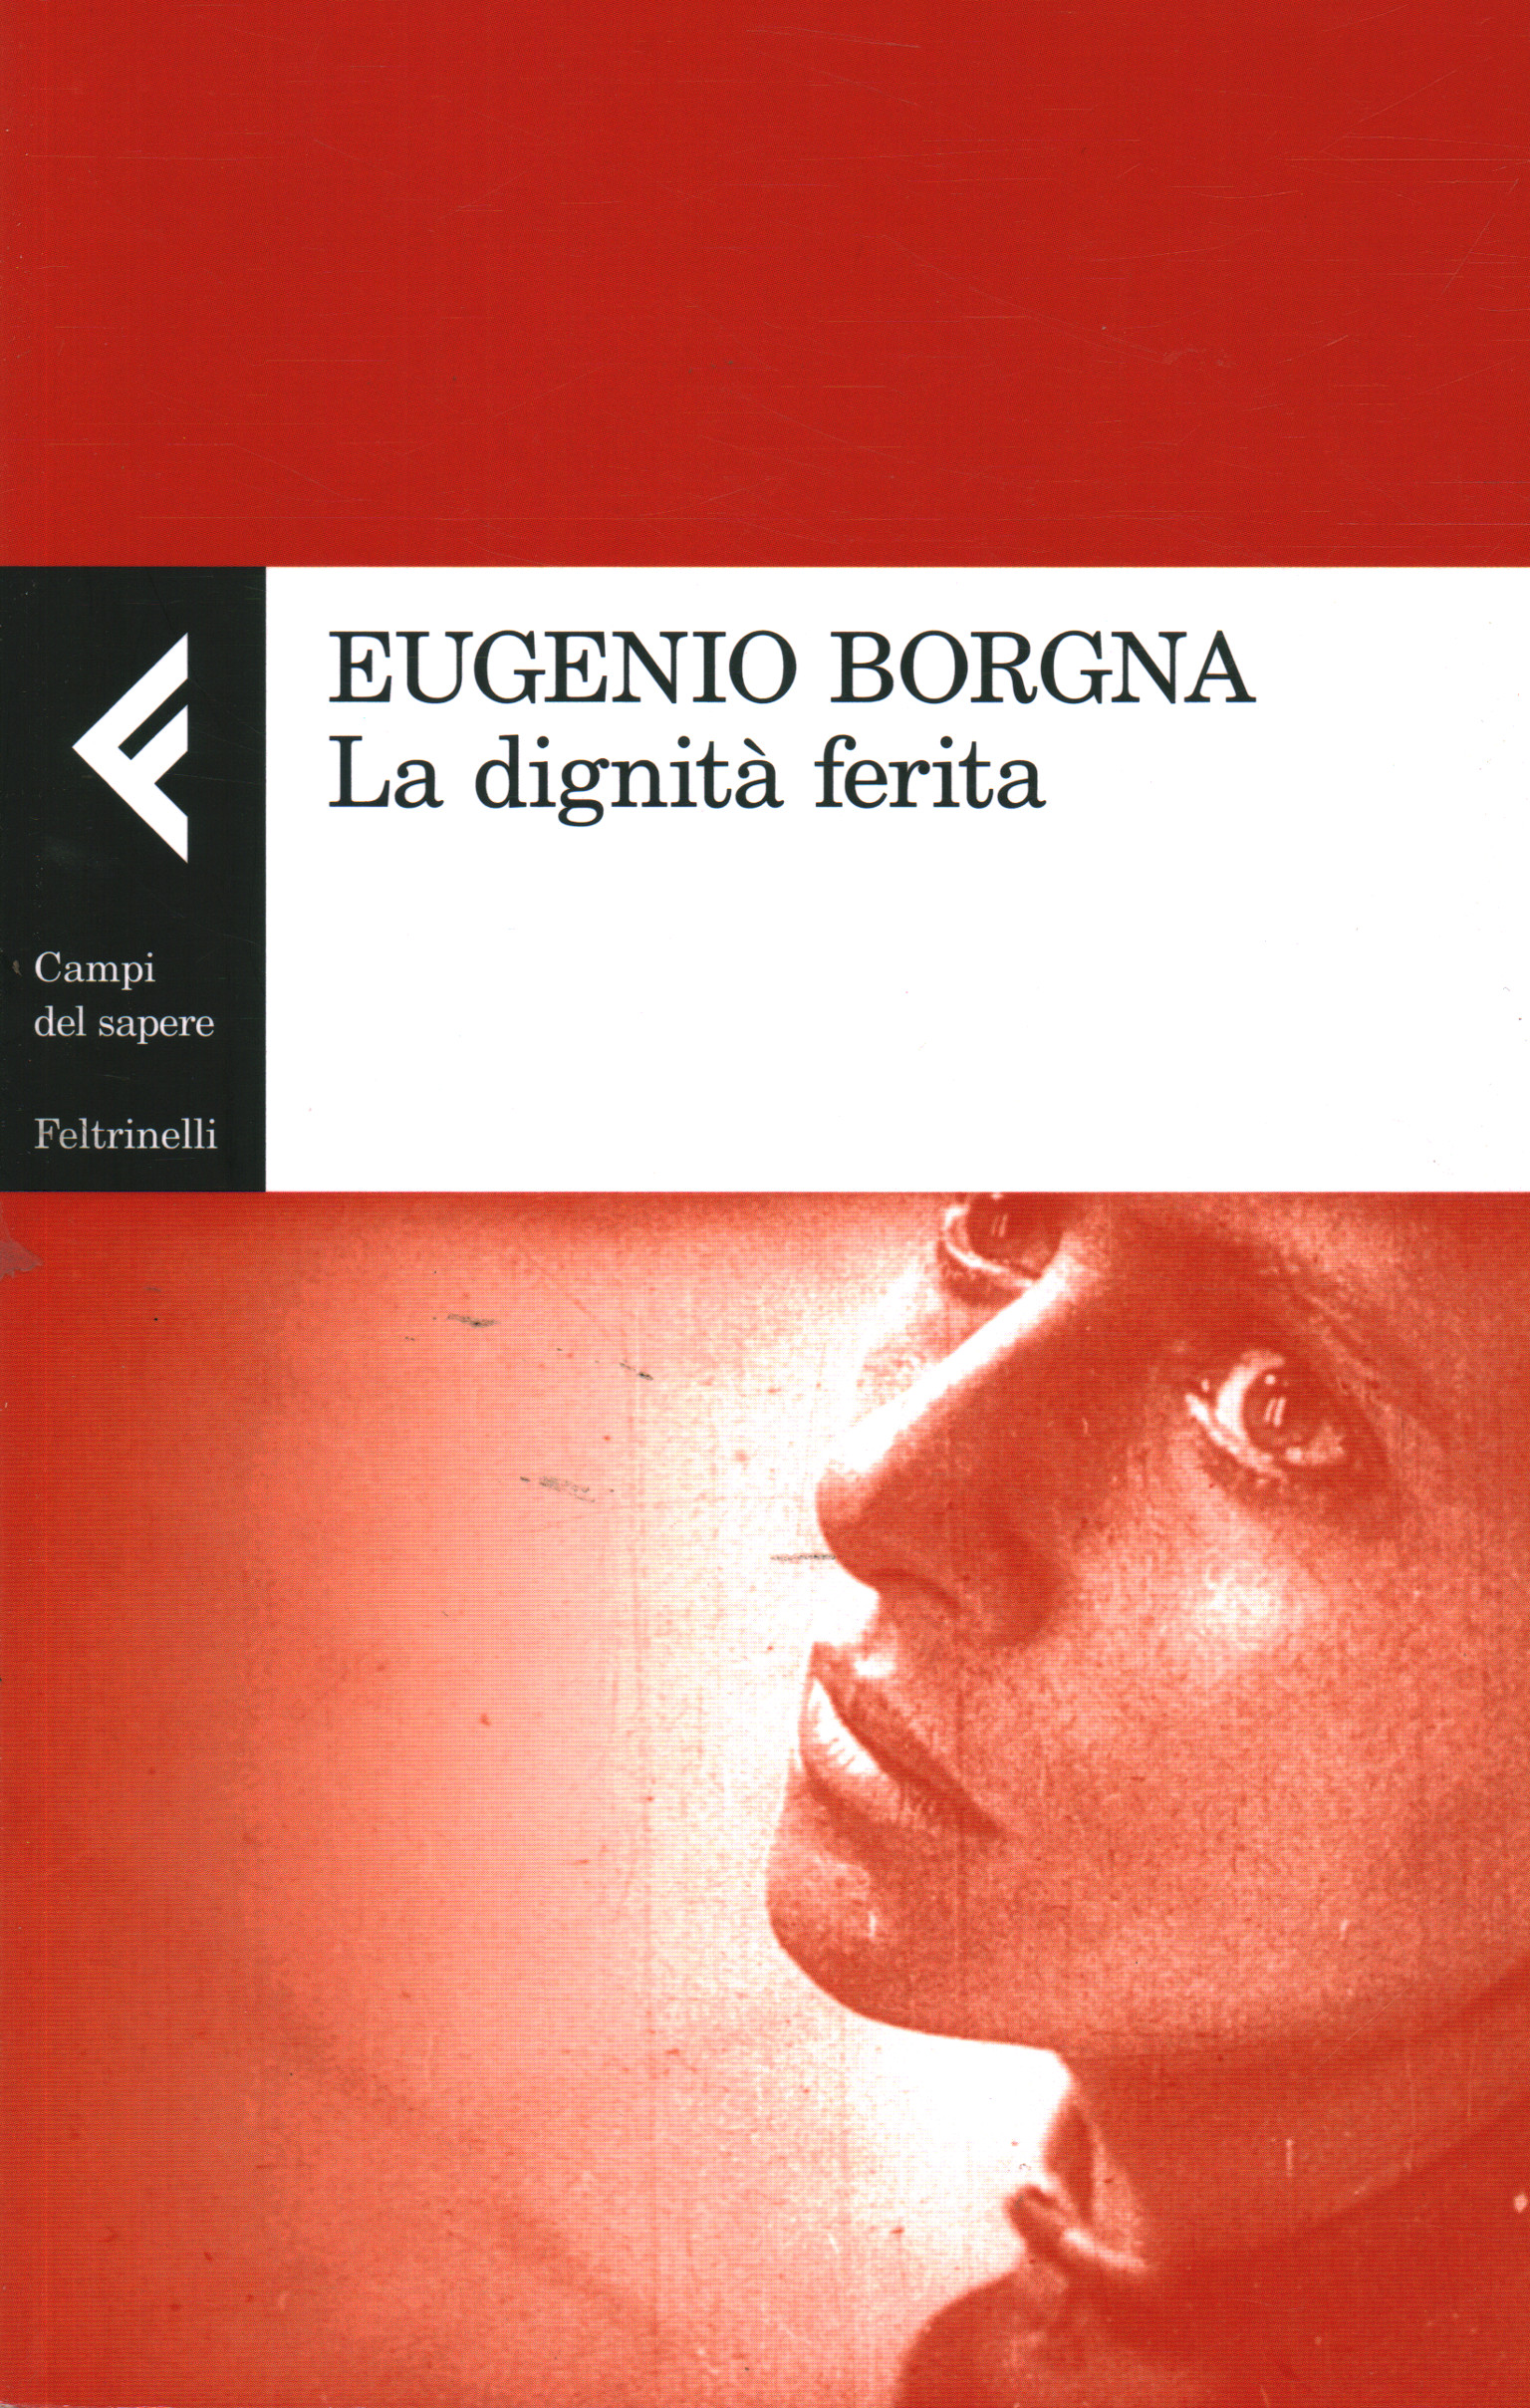 The dignity of the wound, Eugenio Borgna